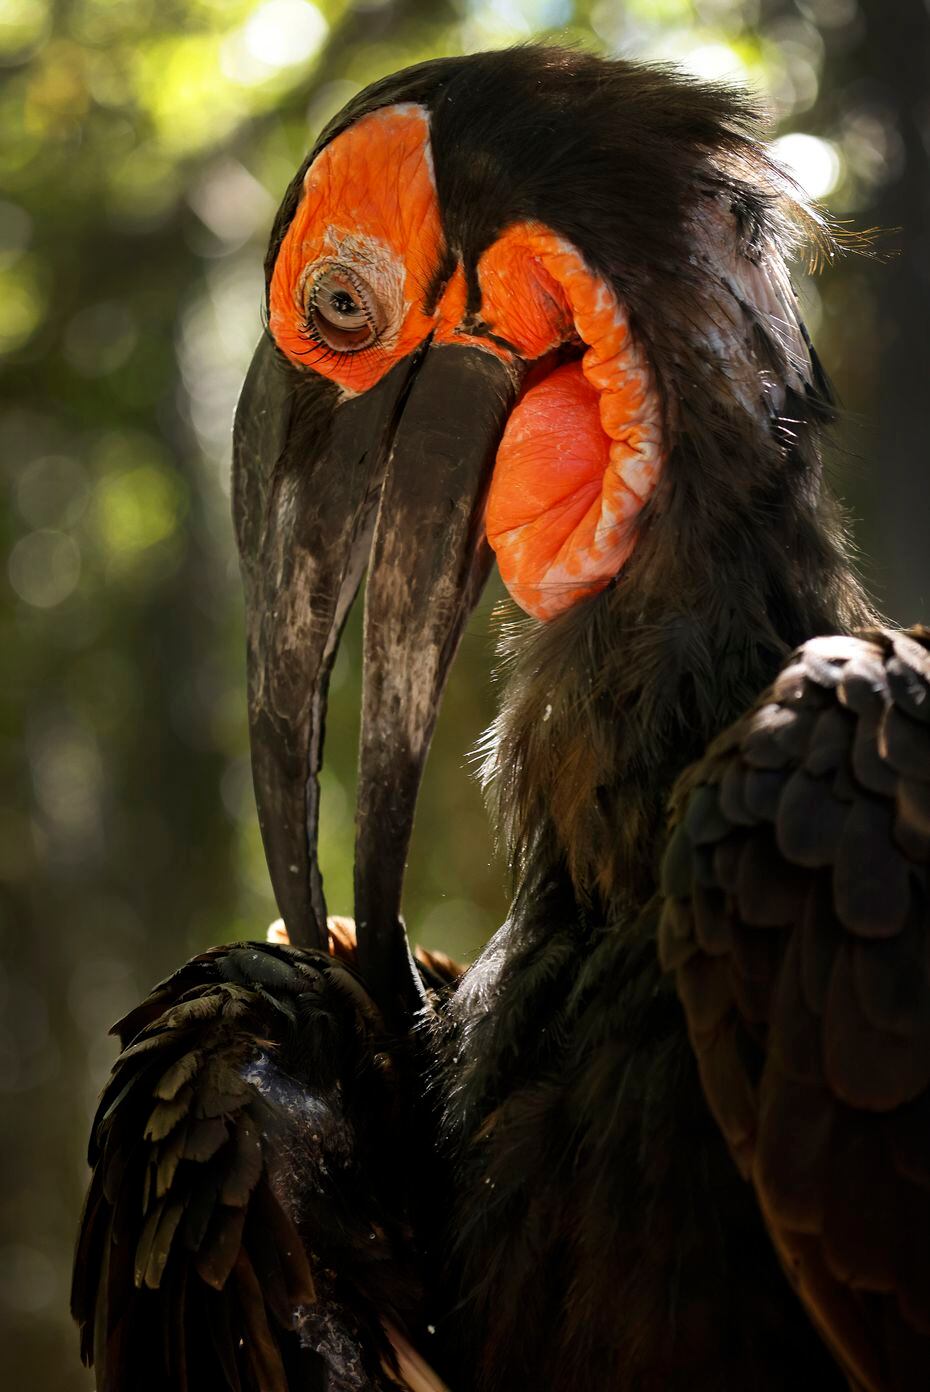 Mosi, a southern ground hornbill, pecked at his wing in an enclosure at the Dallas Zoo, Wednesday, September 22, 2021. The zoo has a family of four hornbills, and has raised six chicks behind the scenes since 2017. (Tom Fox/The Dallas Morning News) 